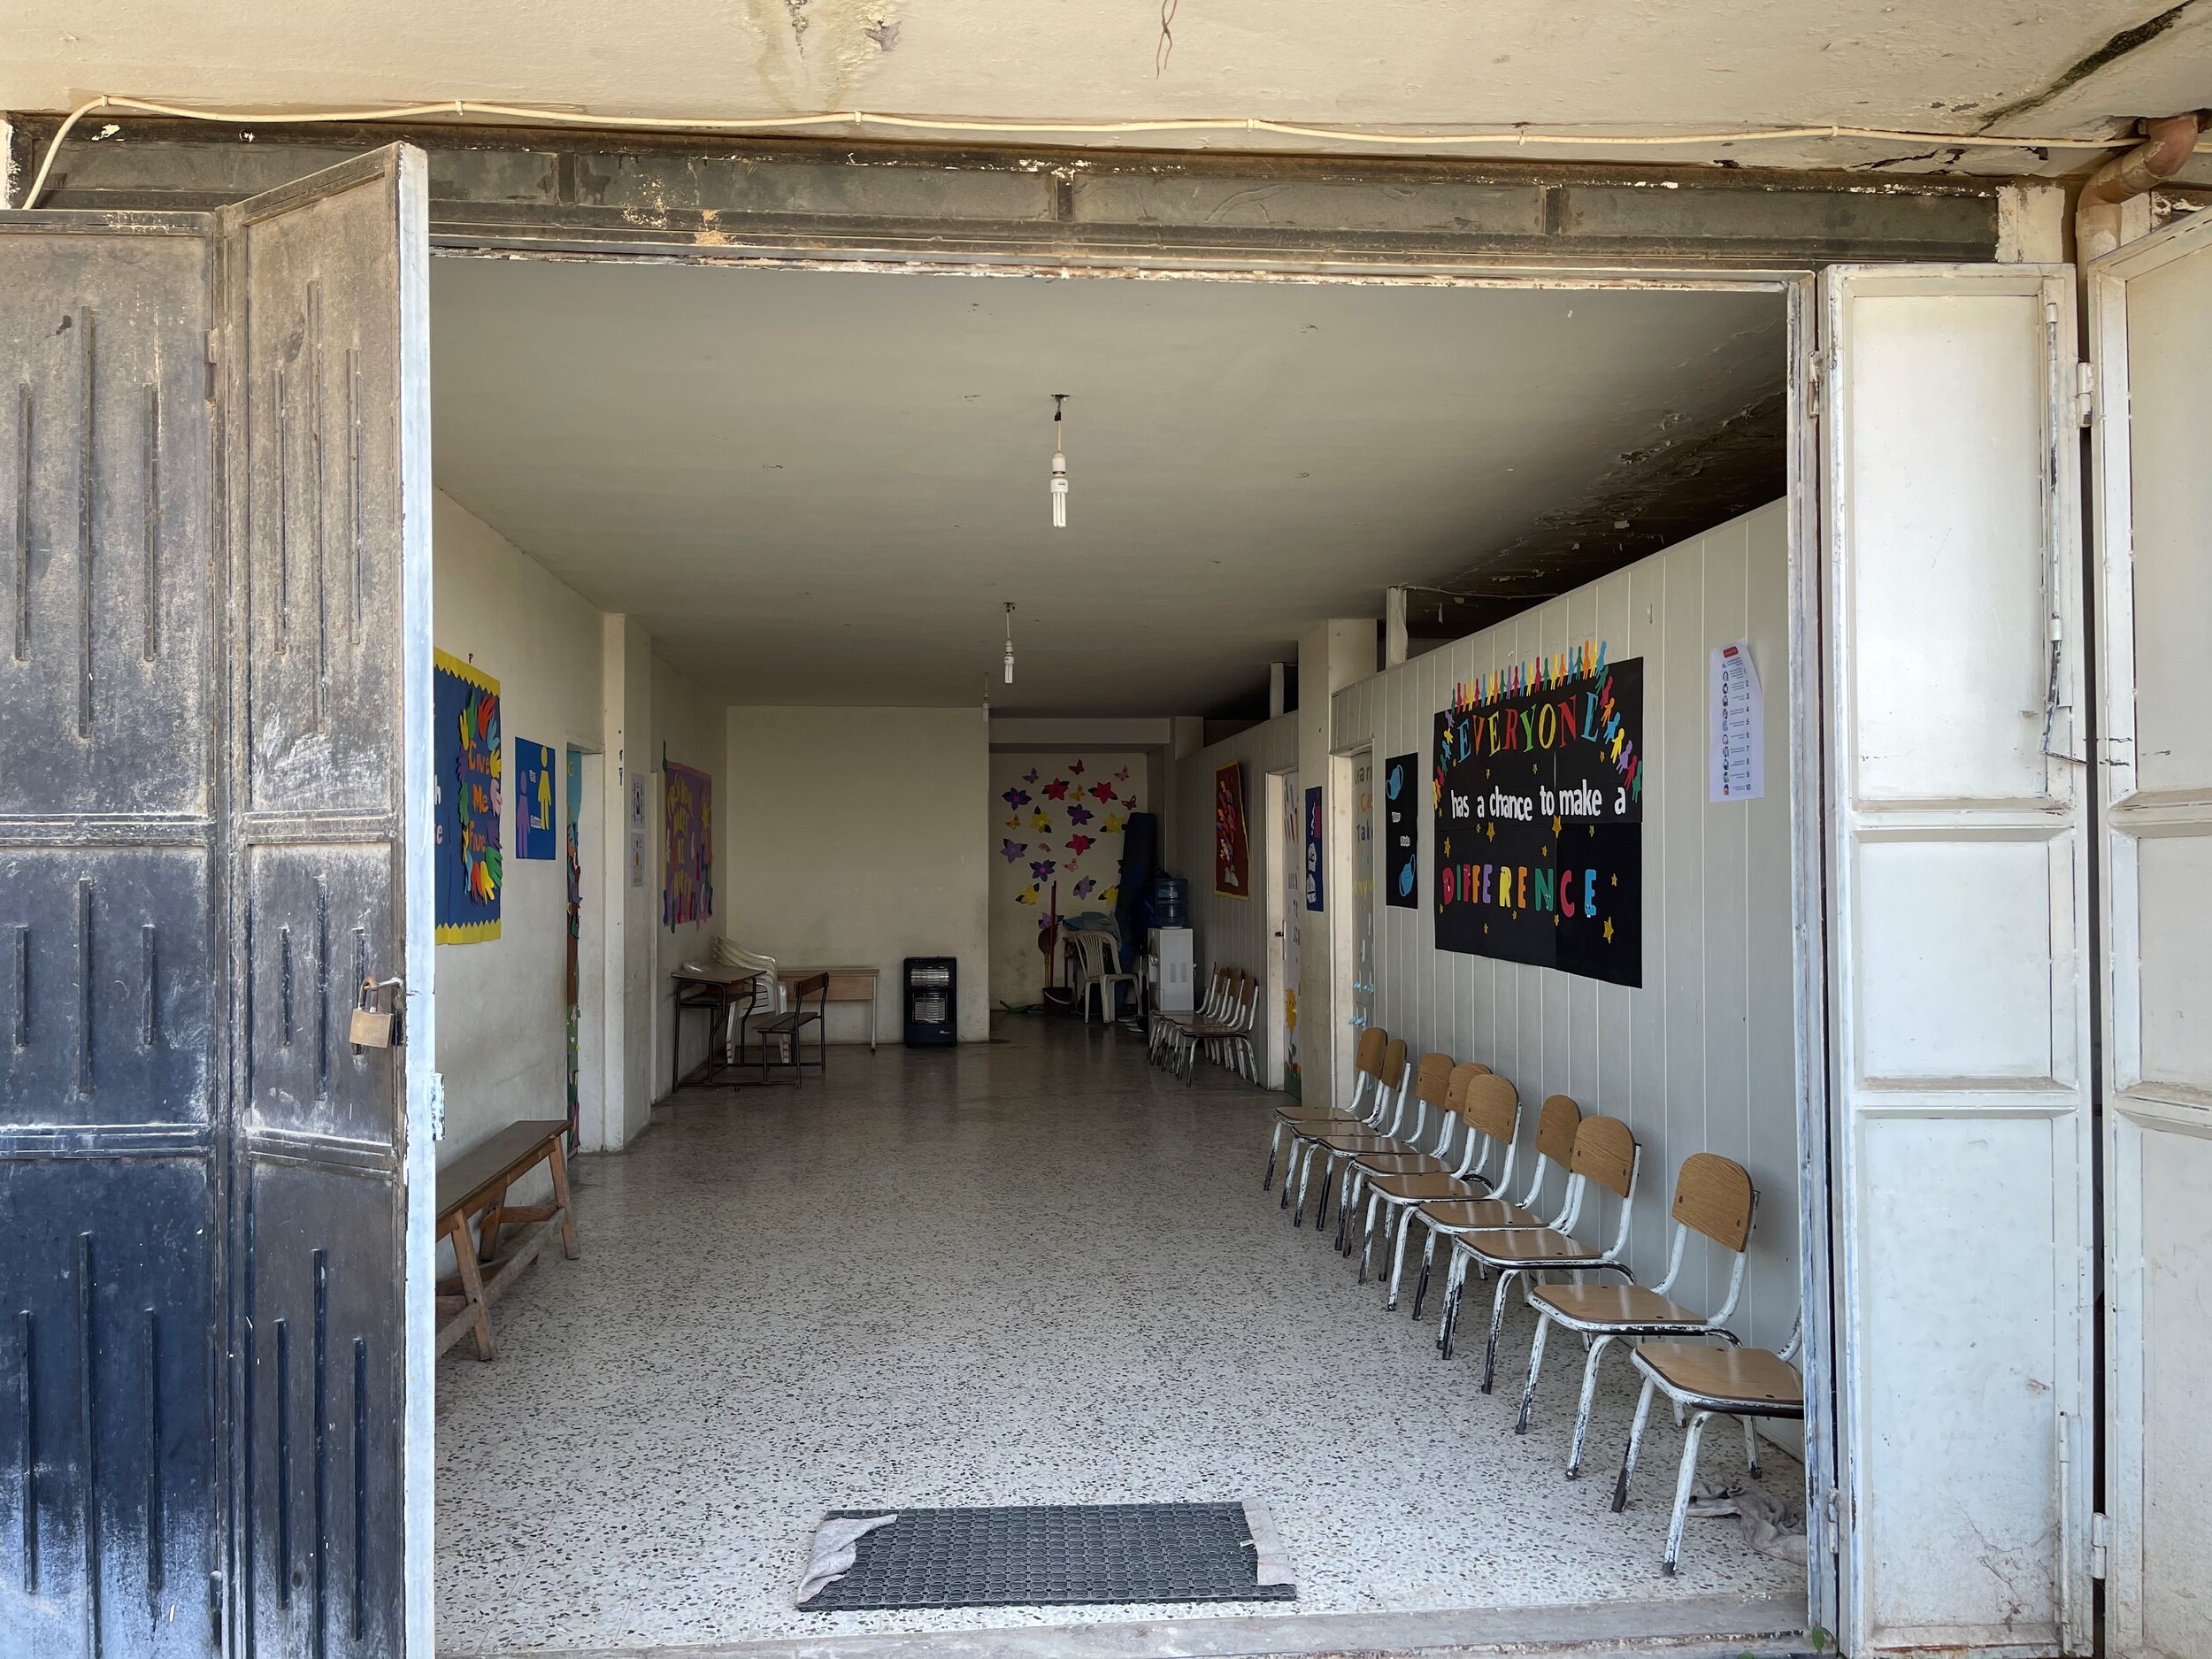 One of three side by side garages transformed into a center of Light and Hope for 60 refugee children